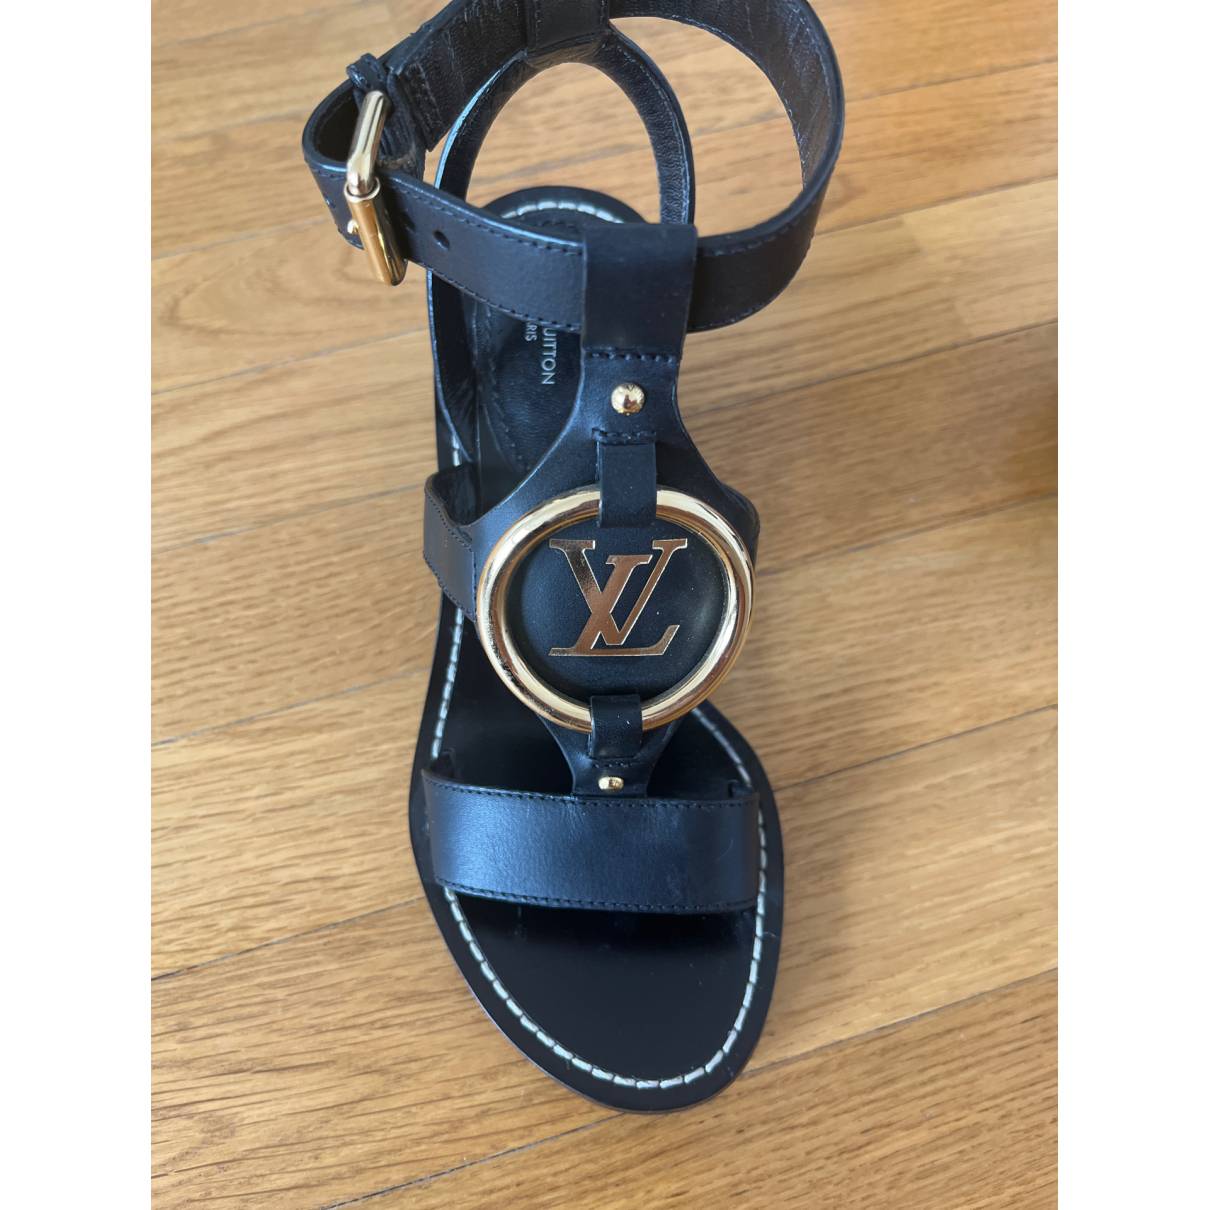 Academy leather sandals Louis Vuitton Black size 36 EU in Leather